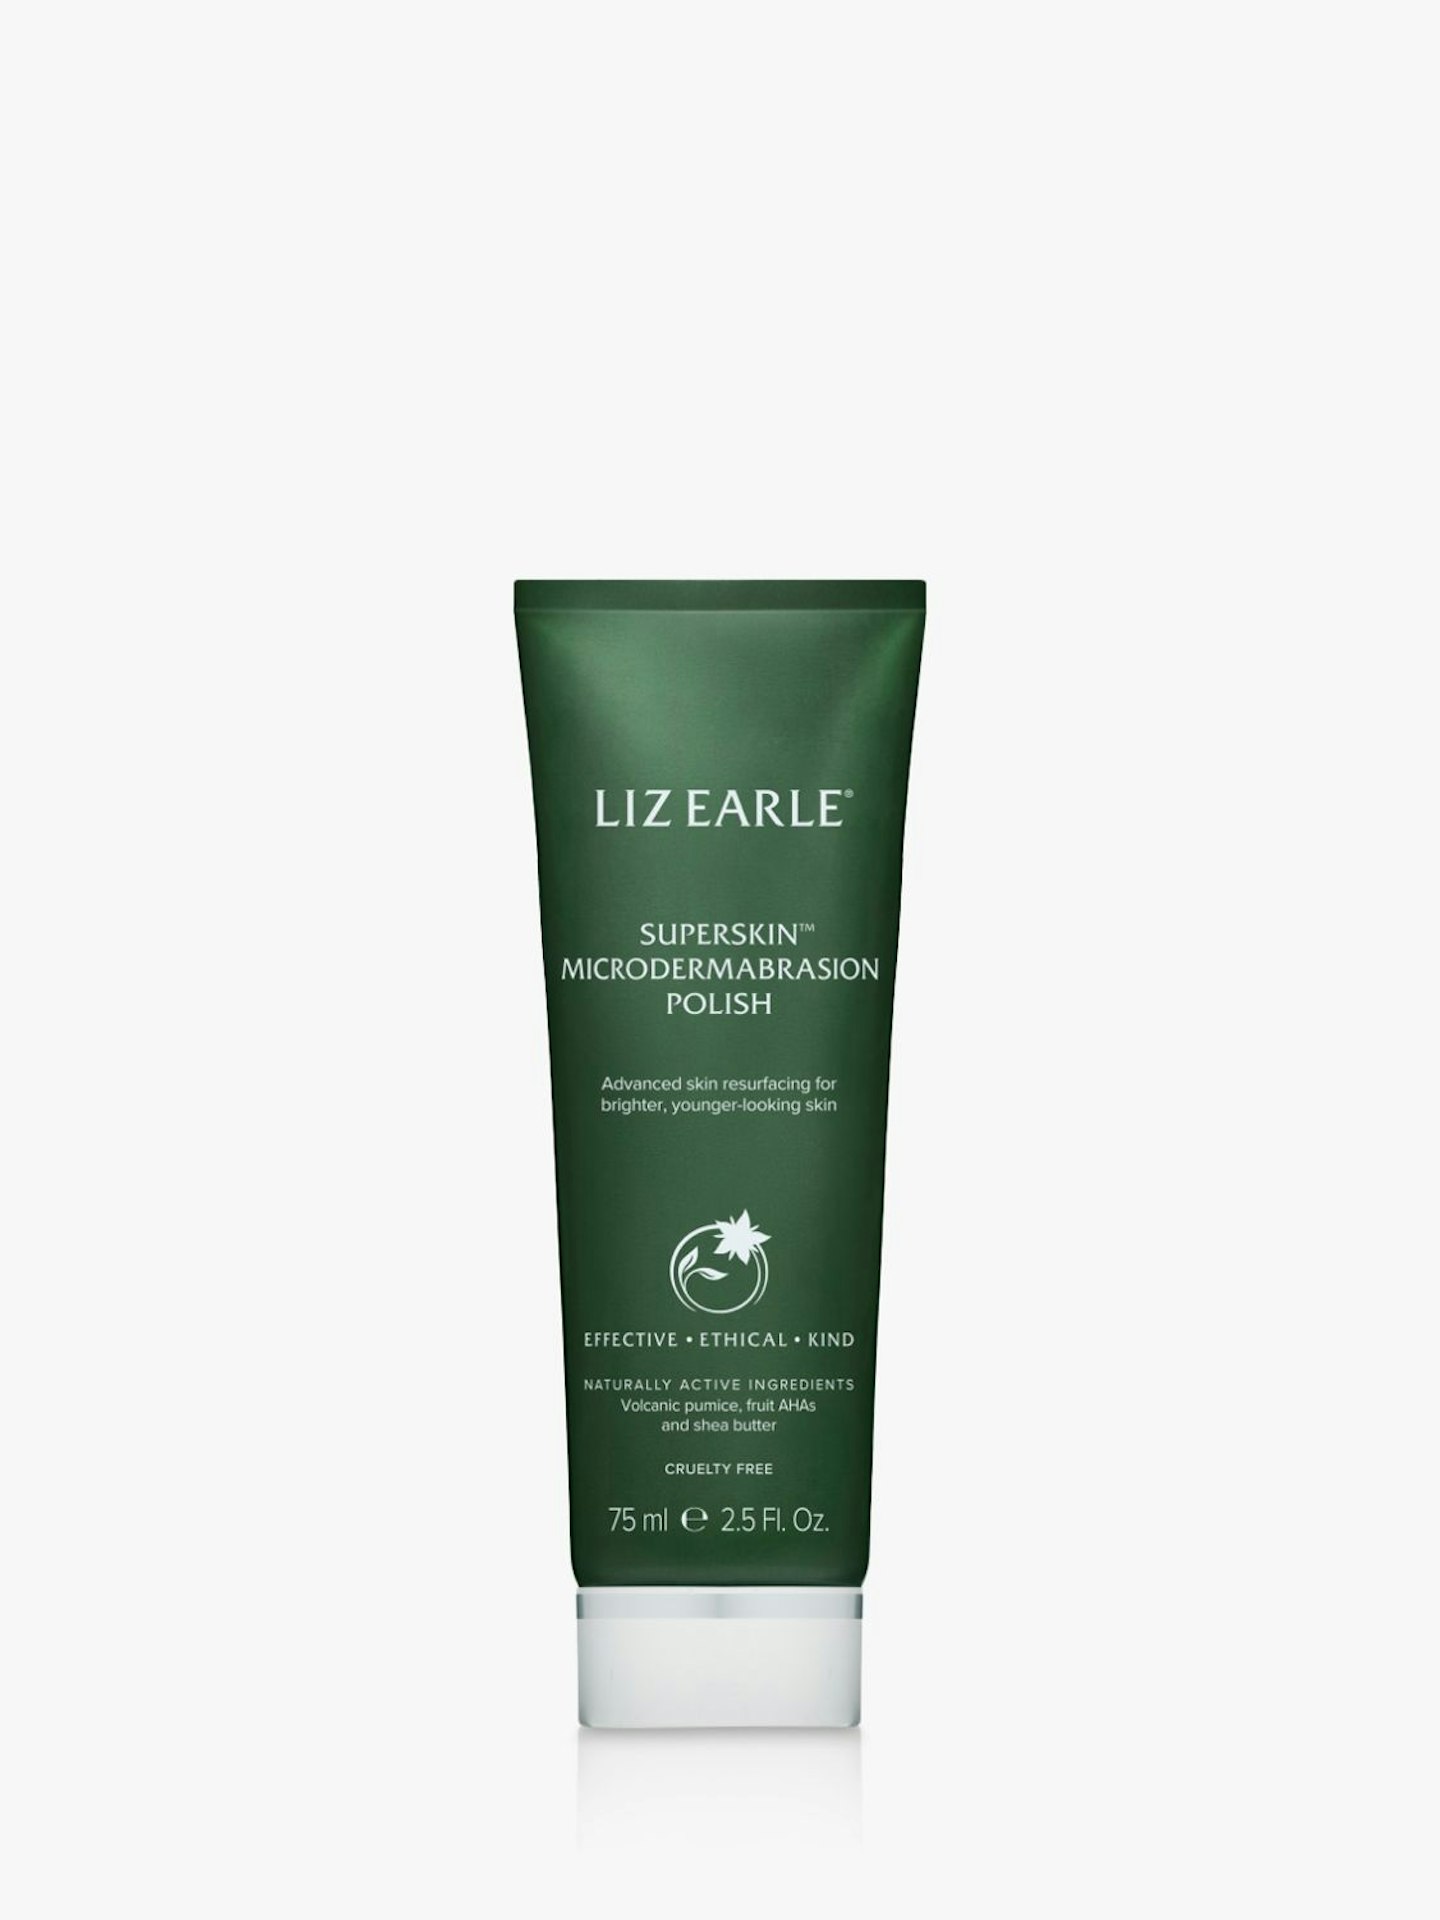 Liz Earle, Superskinu2122 Microdermabrasion Polish, 75ml 3 Liz Earle Superskinu2122 Microdermabrasion Polish, 75ml 4 Liz Earle Superskinu2122 Microdermabrasion Polish, 75ml 5  STYLE INSPIRATION Share how you styled this product and feature on our website. Simply mention @johnlewis in your Instagram or upload a photo.   Share your look Liz Earle Superskinu2122 Microdermabrasion Polish, £25.50